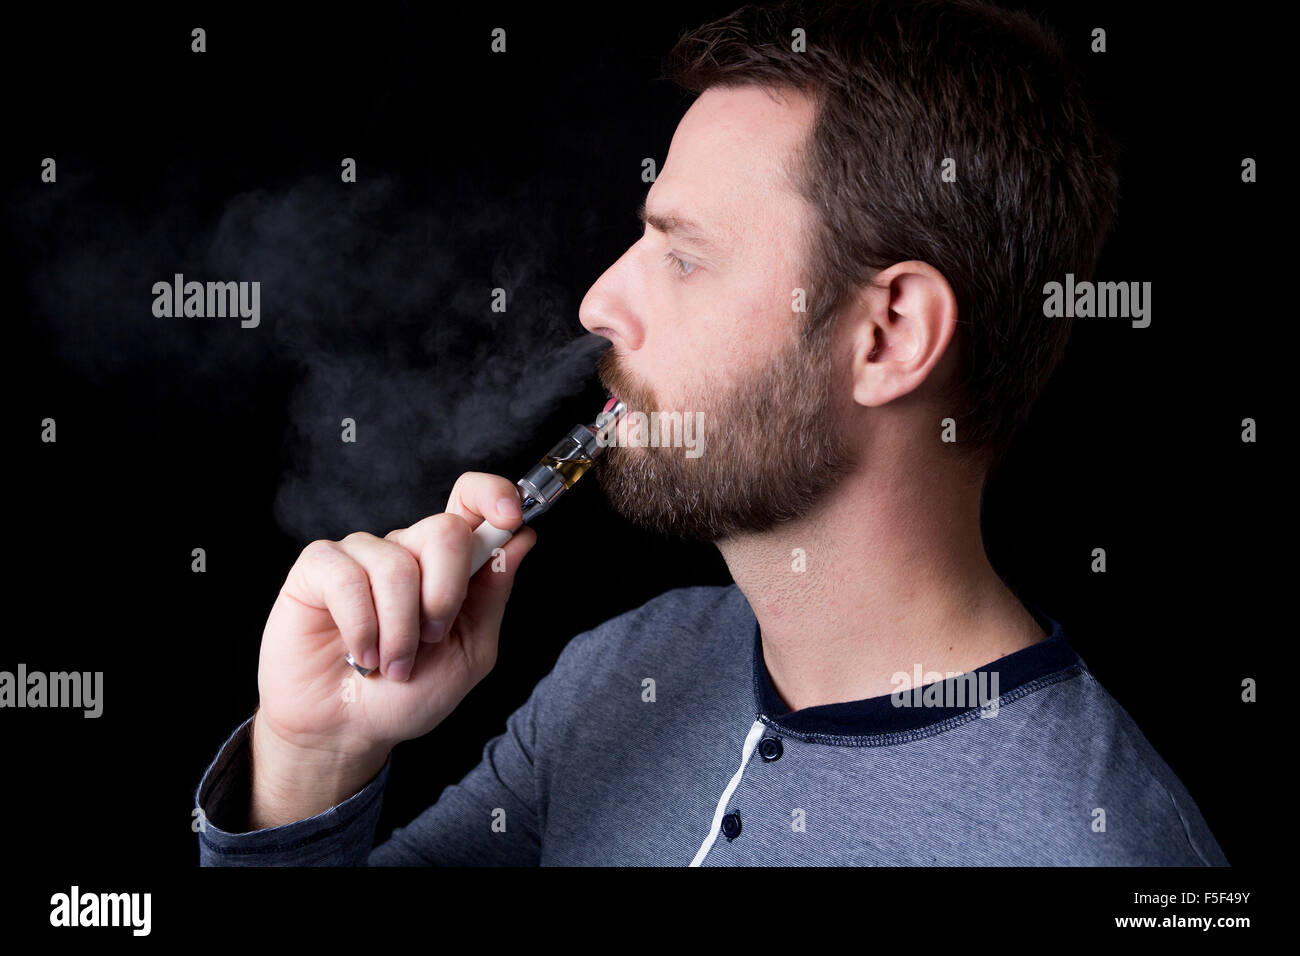 smoking electric cigarettes on the black background Stock Photo